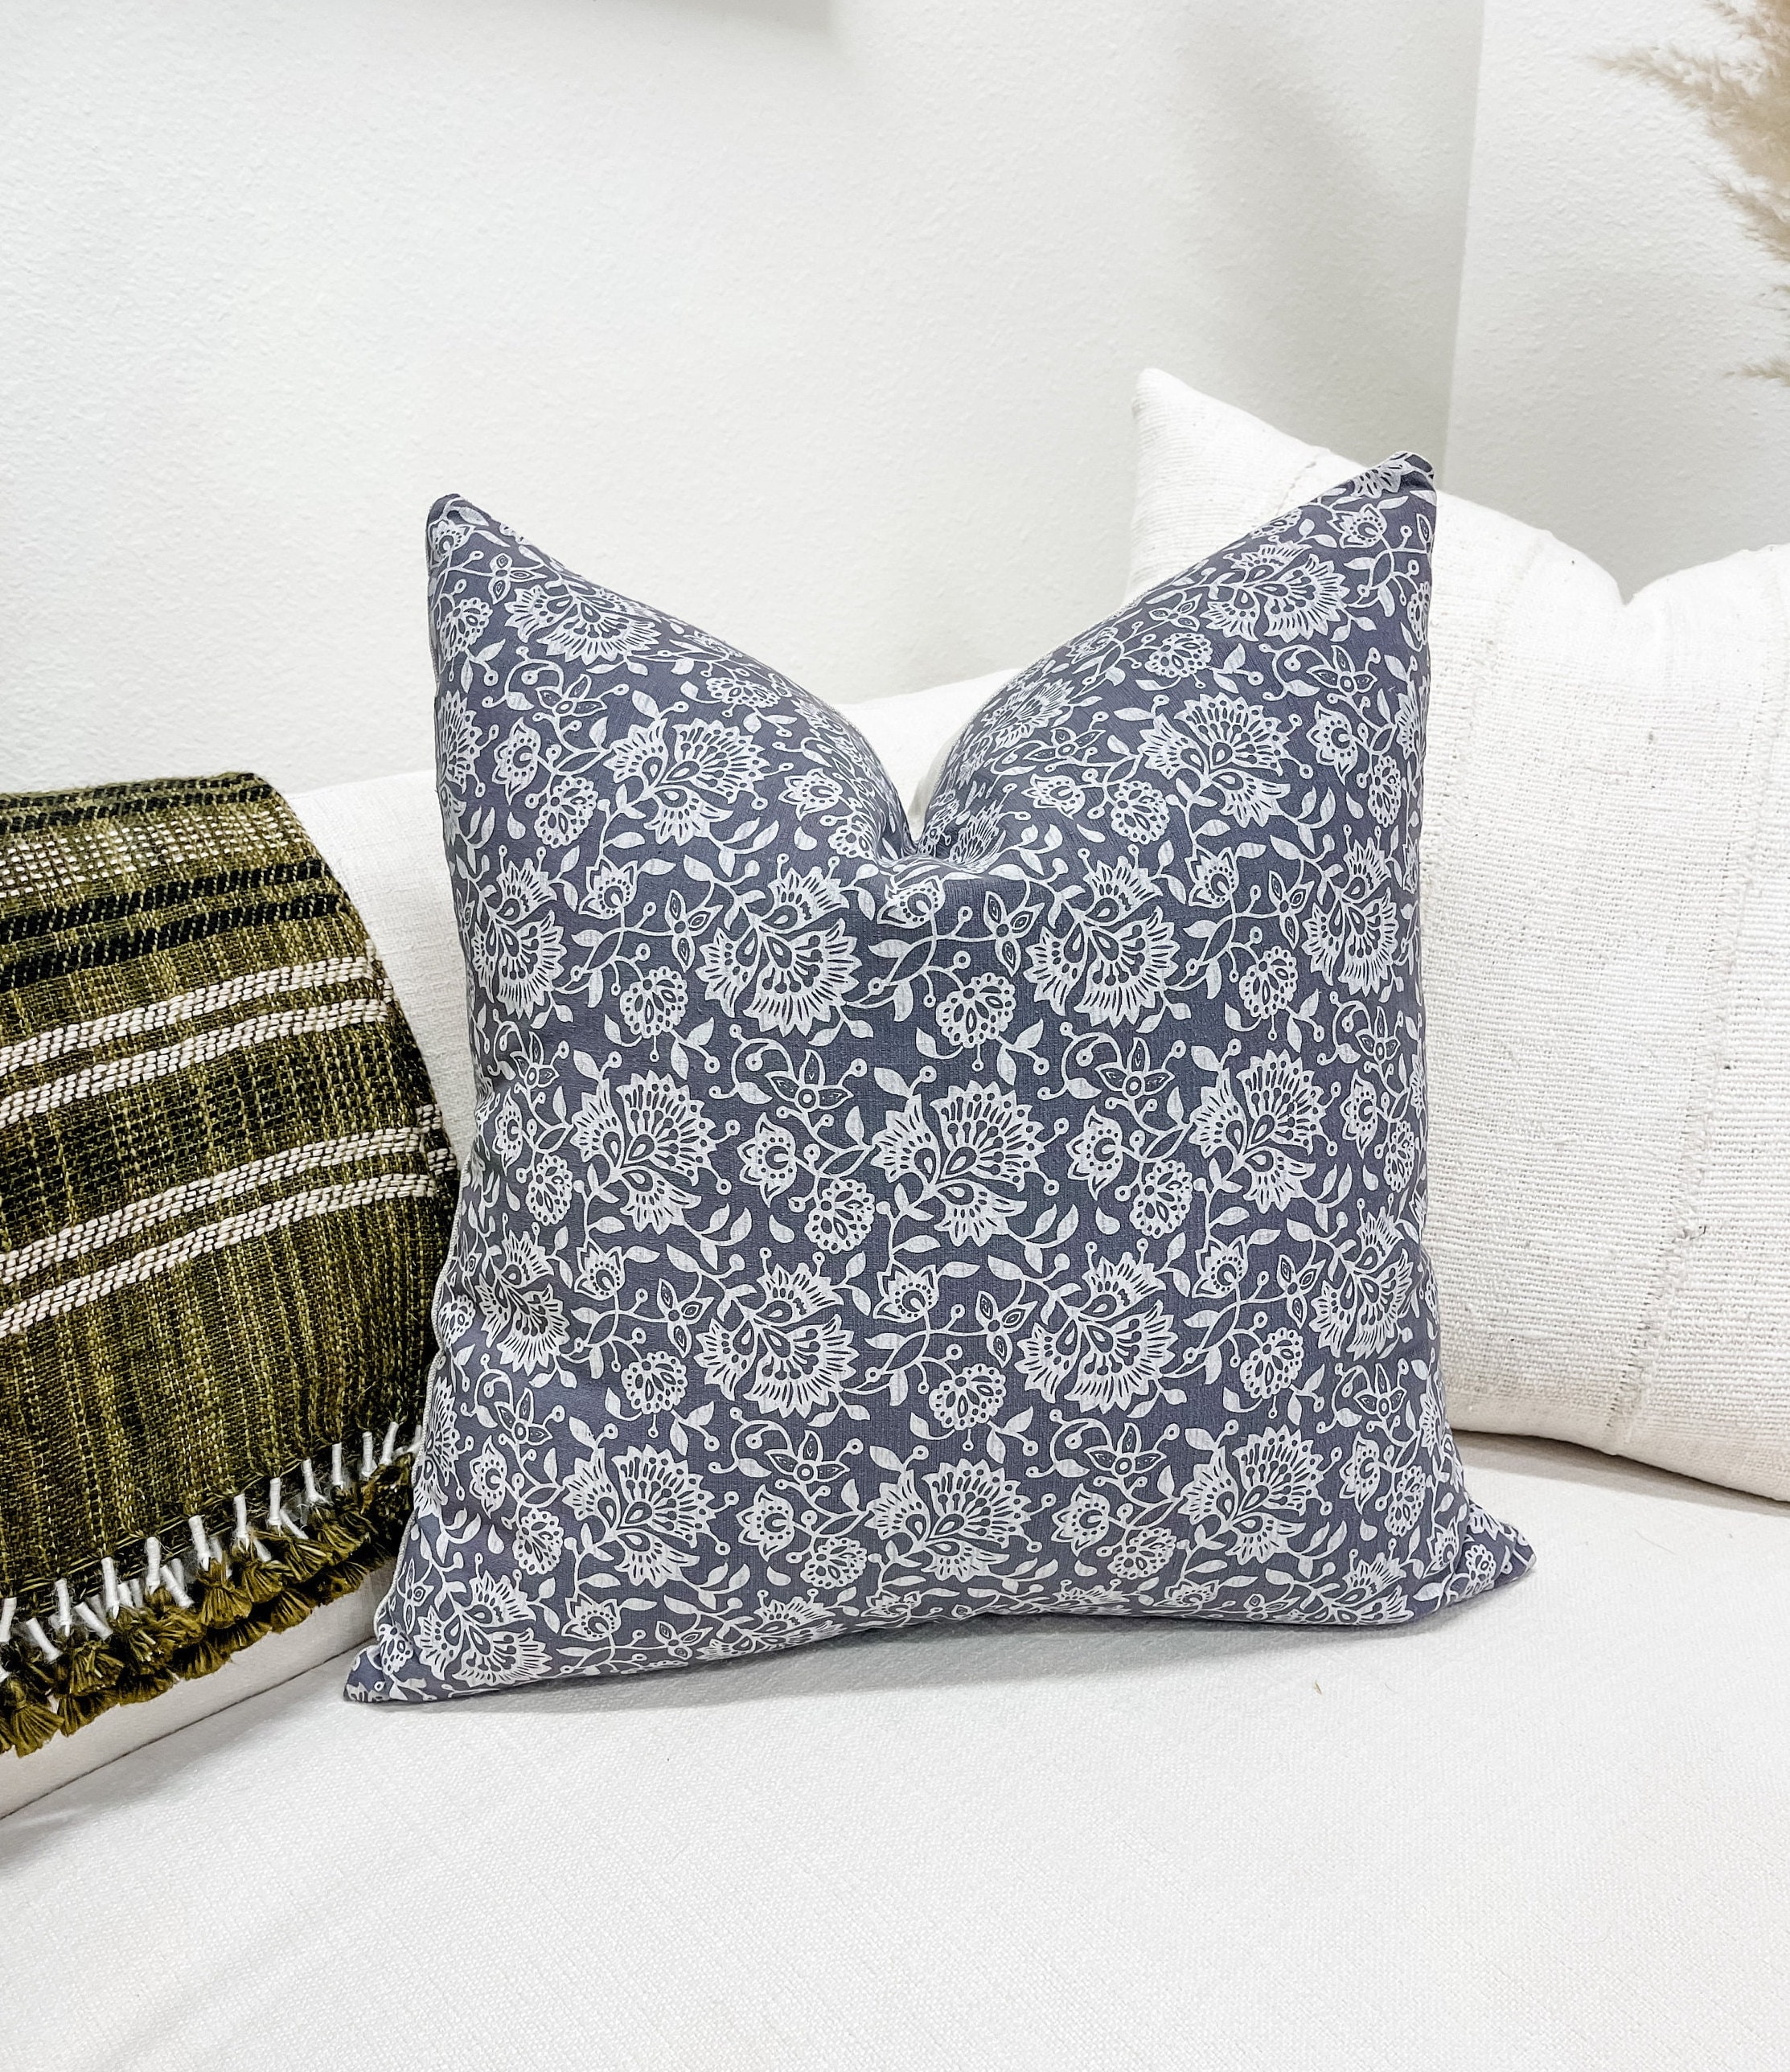 Designer Floral Pillow Cover in Blue Grey Accent Floral 